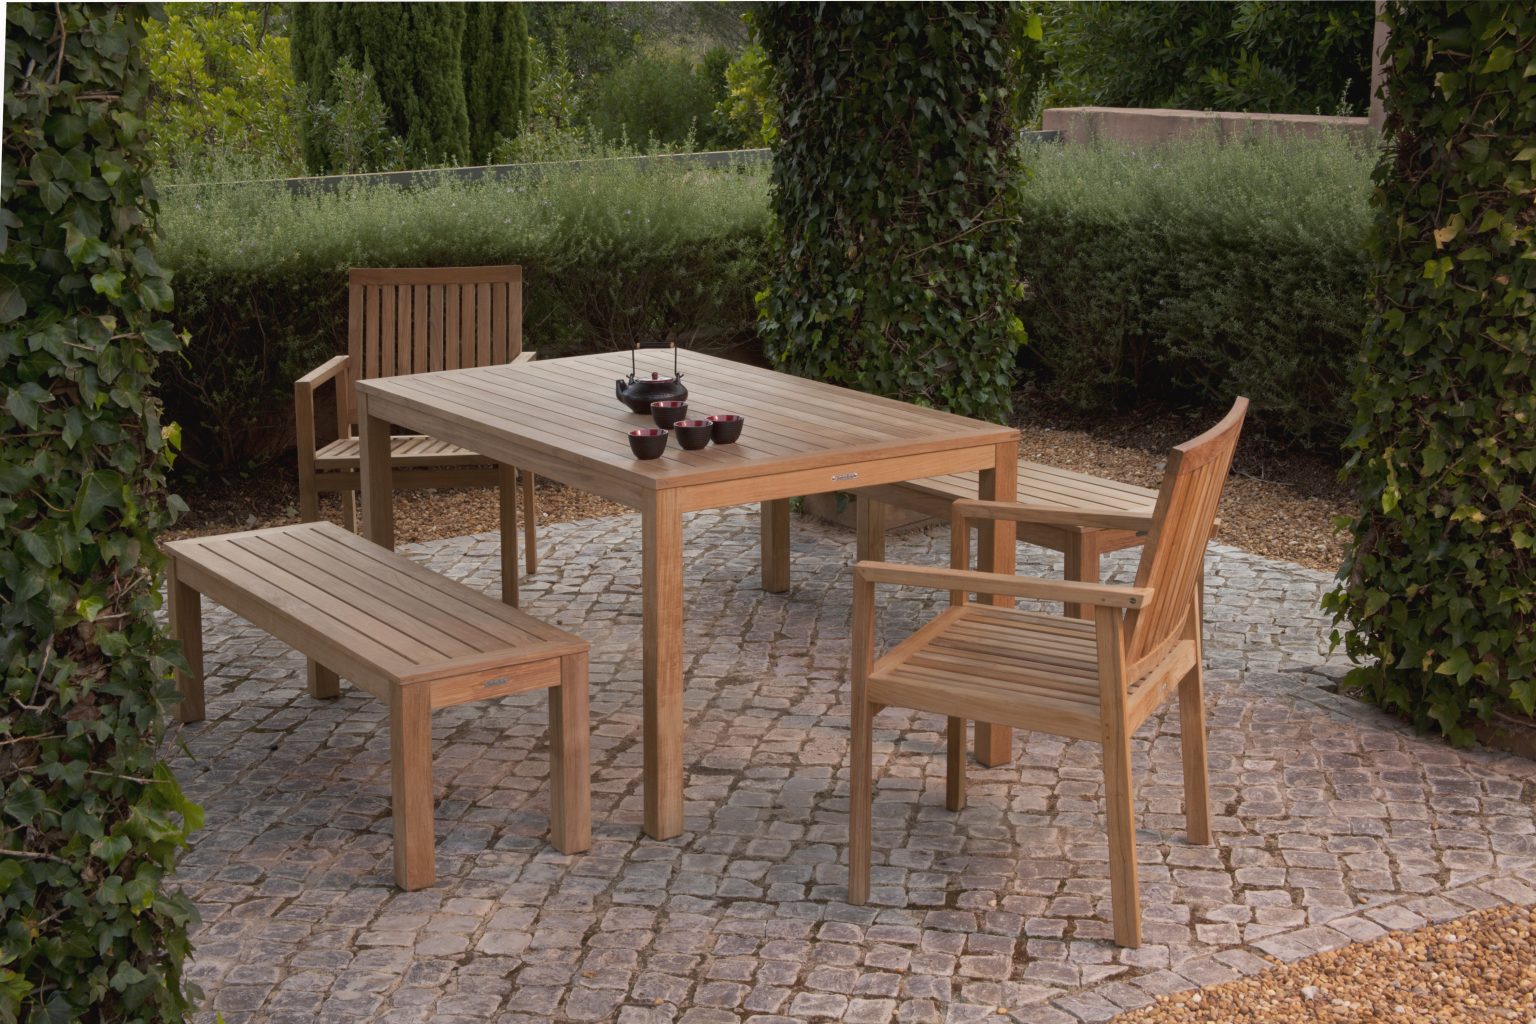 The Ultimate Guide To Teak Outdoor Furniture: Tips For Choosing The Best Pieces